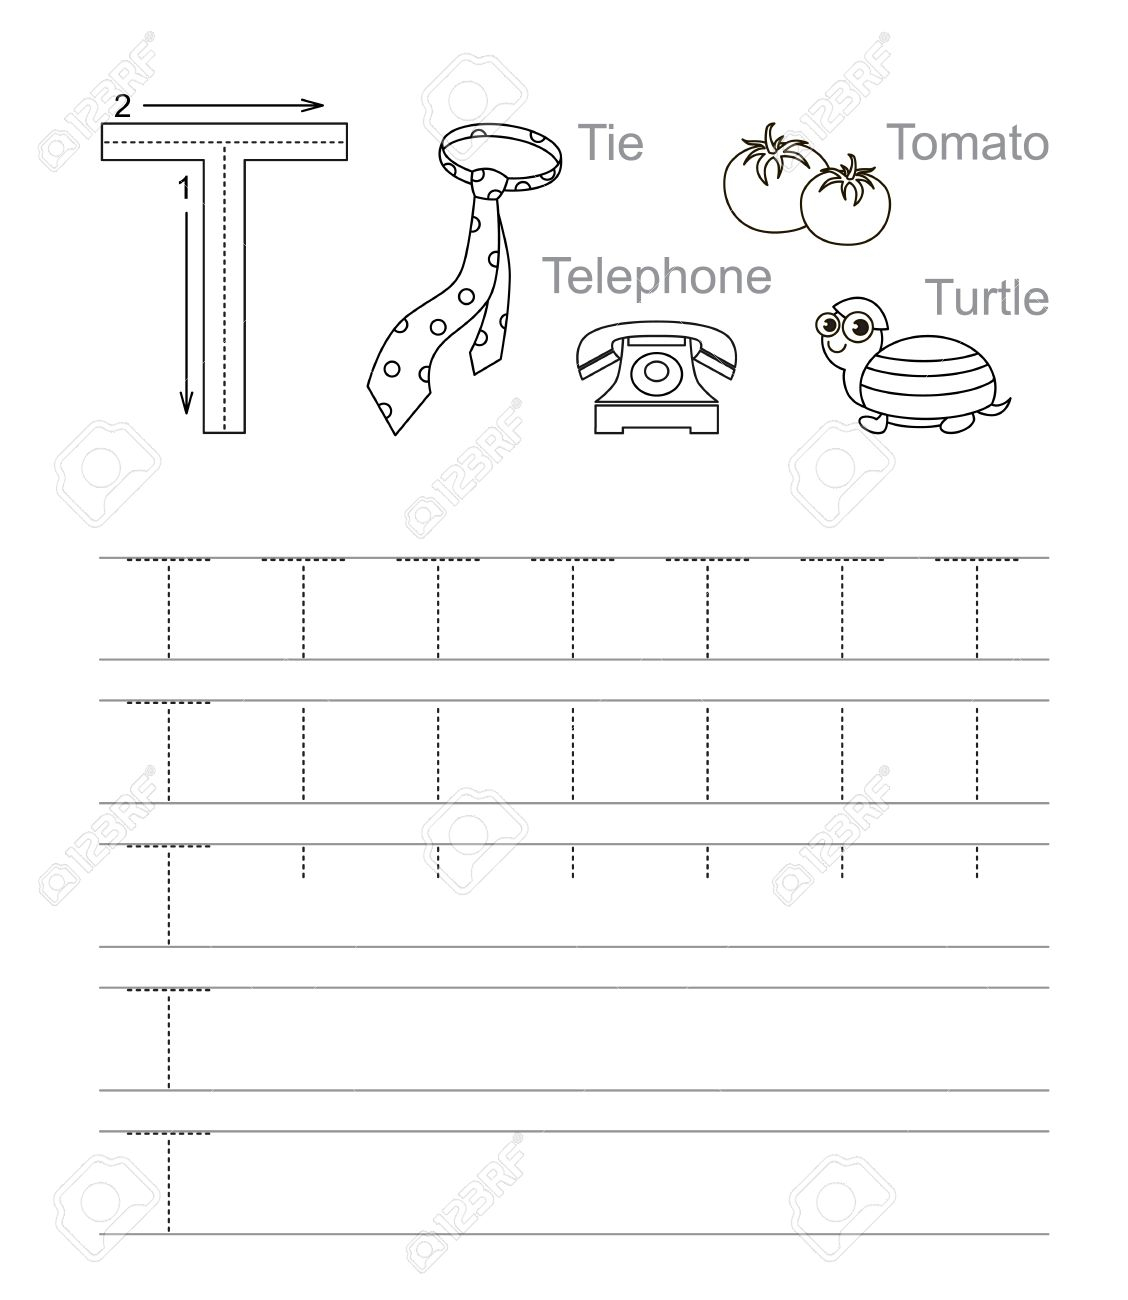 Handwriting Tracing Worksheets - Wpa.wpart.co for Creating Tracing Letters Worksheets